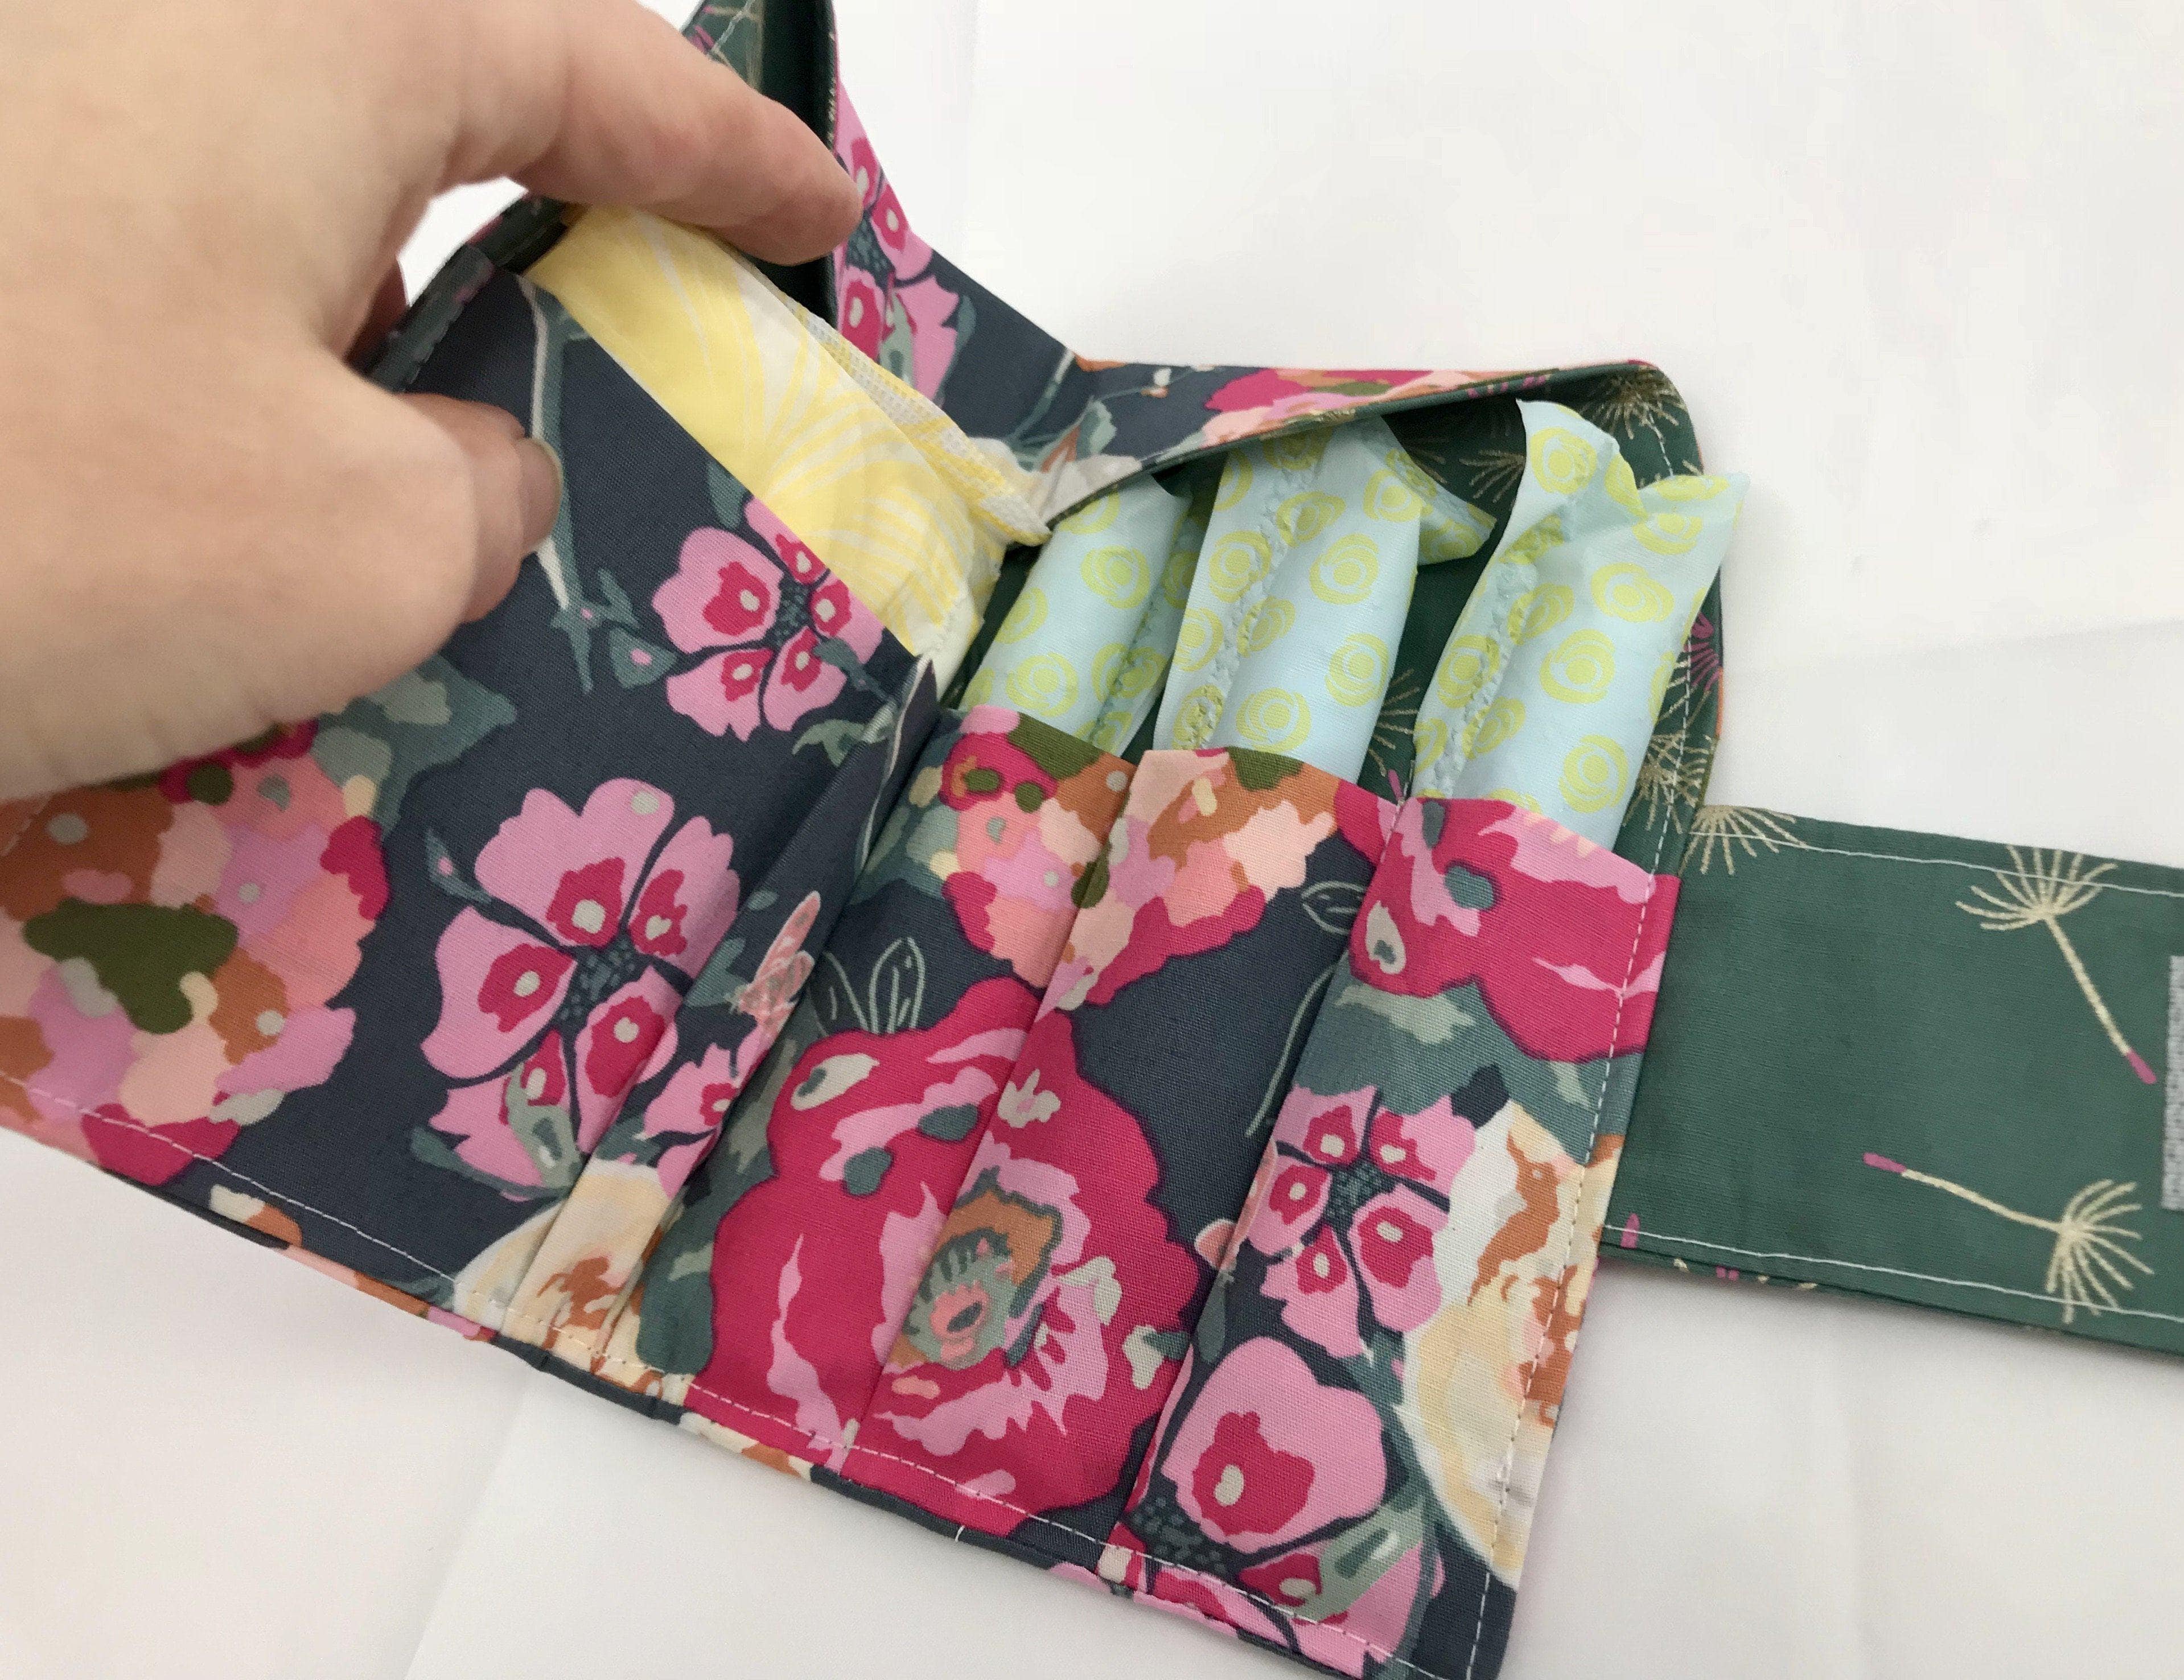 tampon case sanitary pad bag time of the month wallet green pink privacy pouch ecohip custom designs 318492